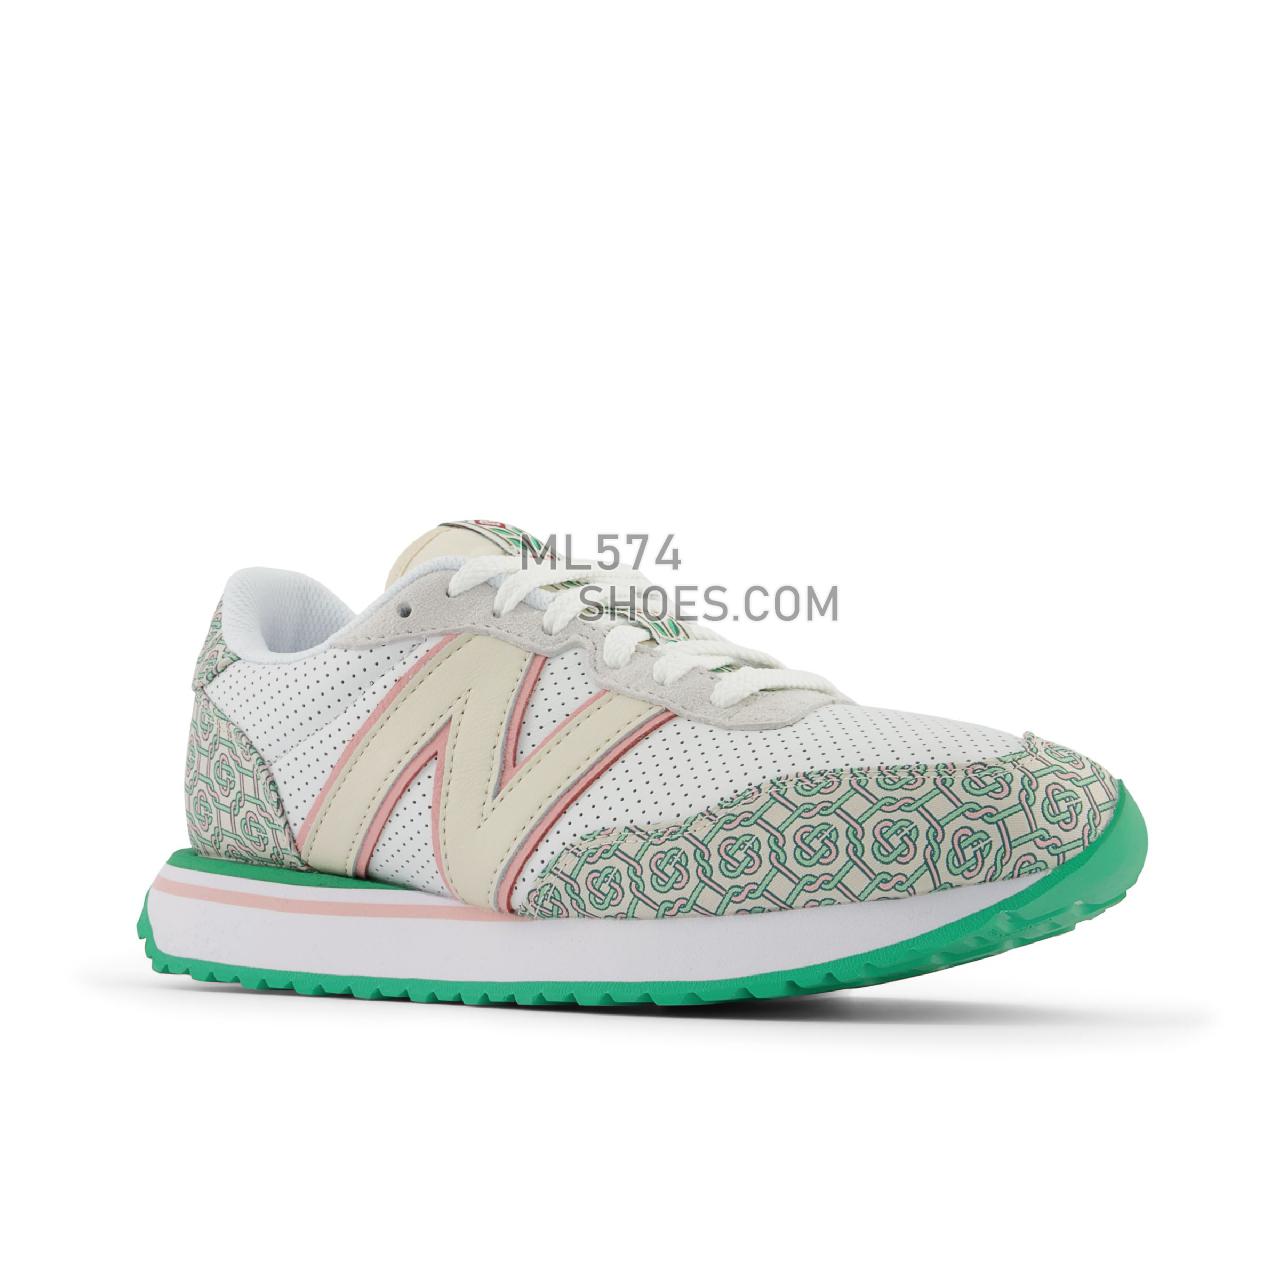 New Balance Casablanca 237 - Unisex Men's Women's Sport Style Sneakers - Nb White with Holly Green - MS237CBA